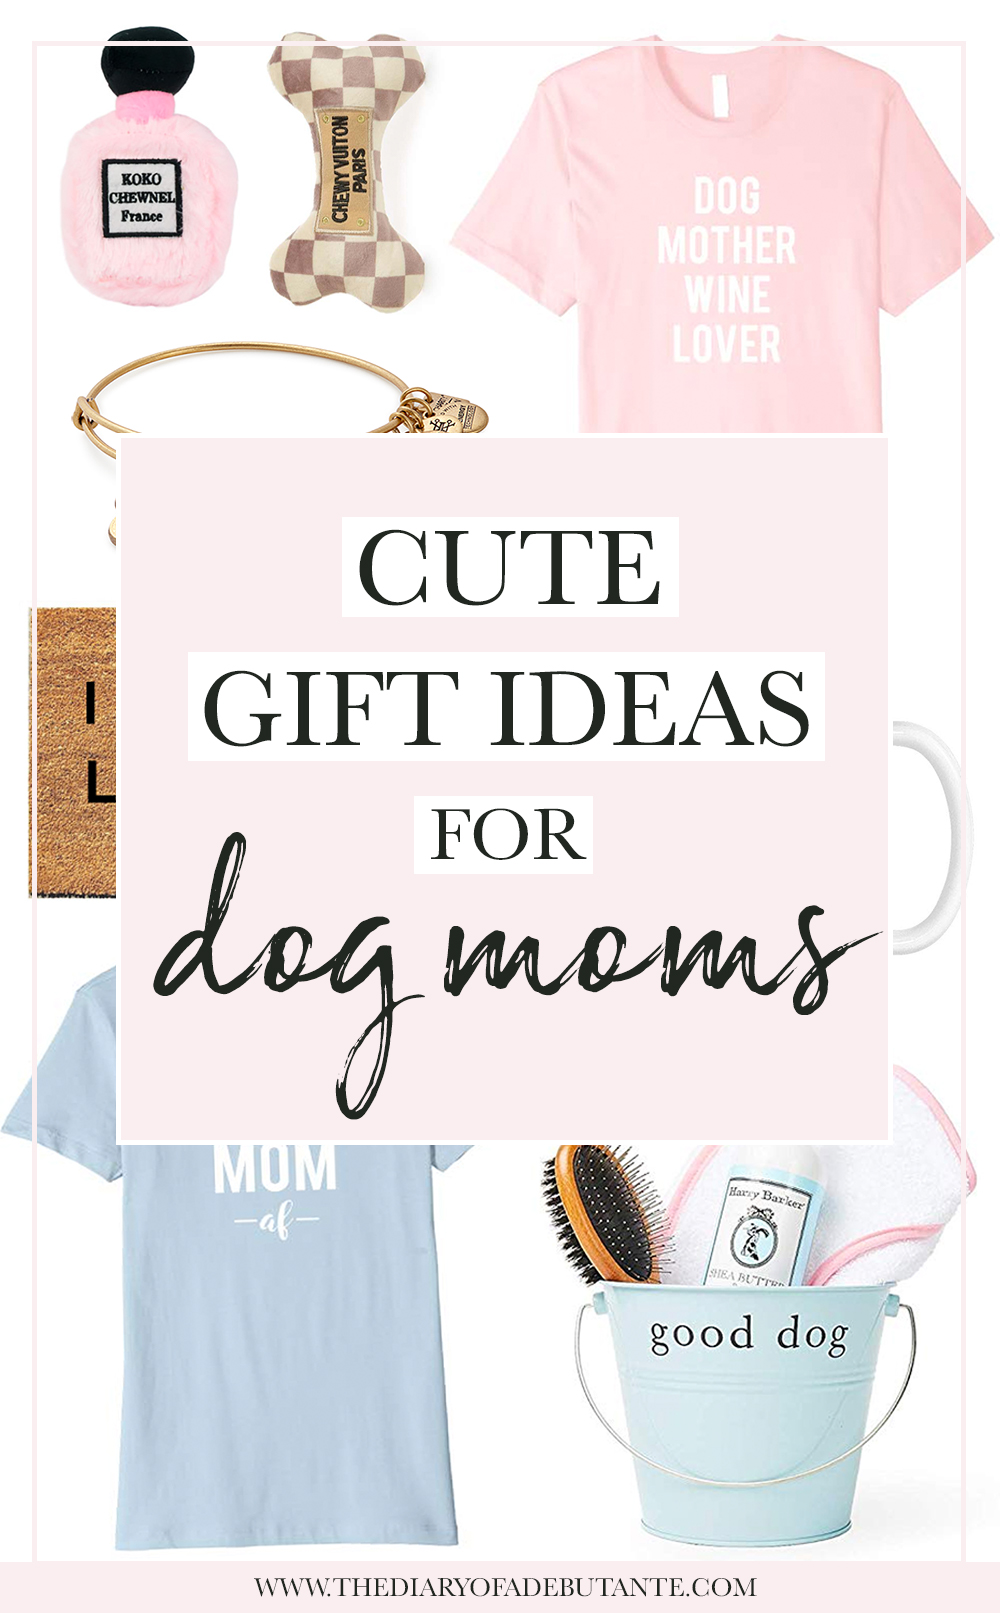 17 Cute Gift Ideas for Dog Moms by popular affordable fashion blogger and dog mom Stephanie Ziajka from Diary of a Debutante, dog mom tees, dog mom gifts, gifts for pet owners